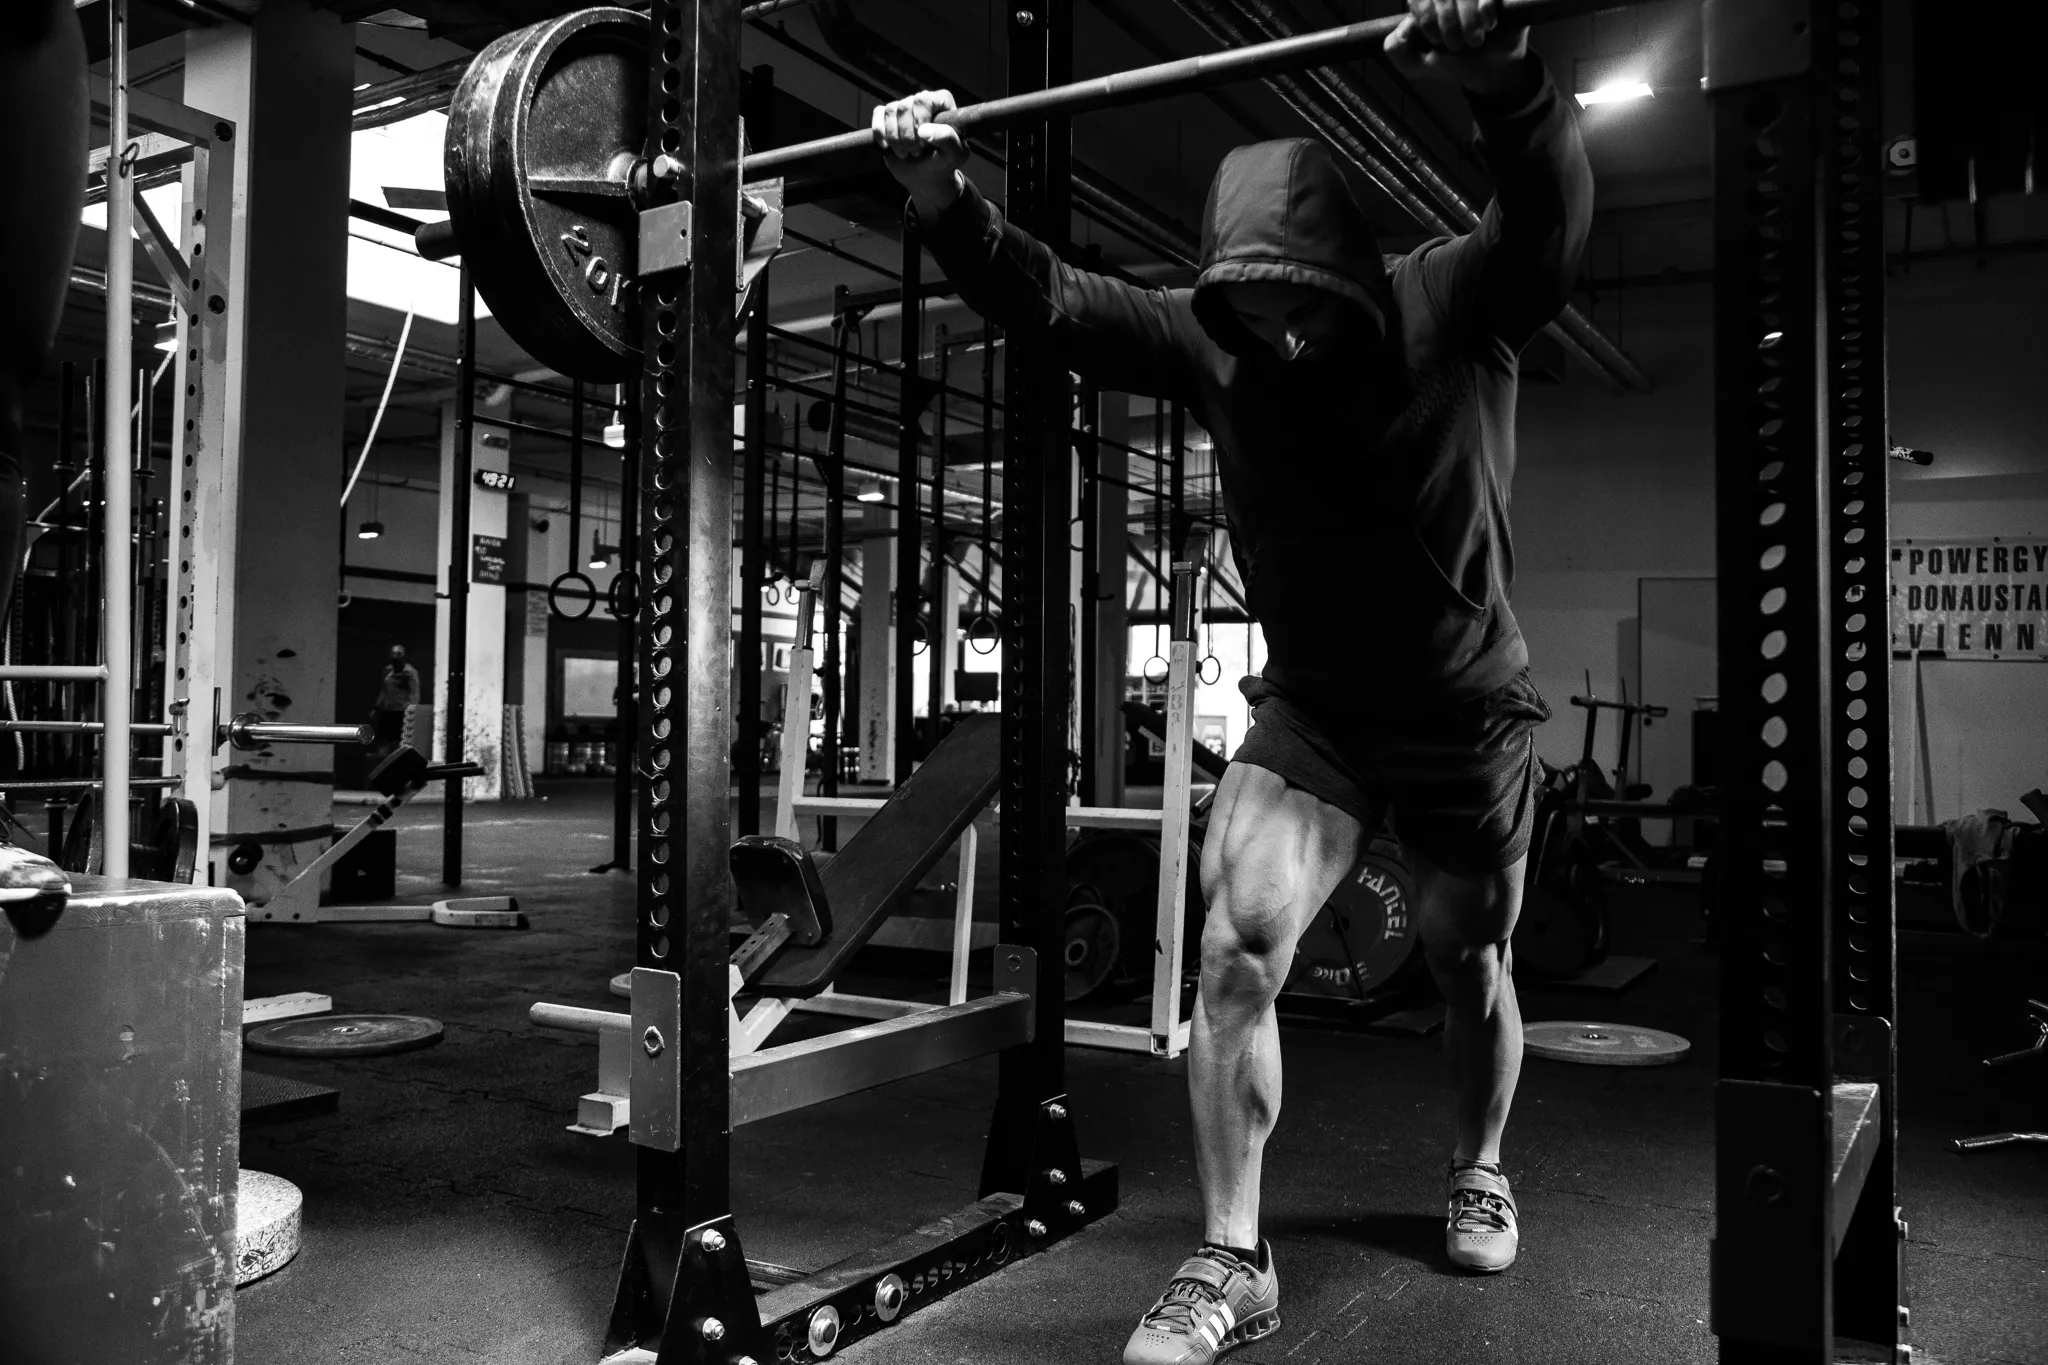 How To Do Squat: The Beginner's Guide